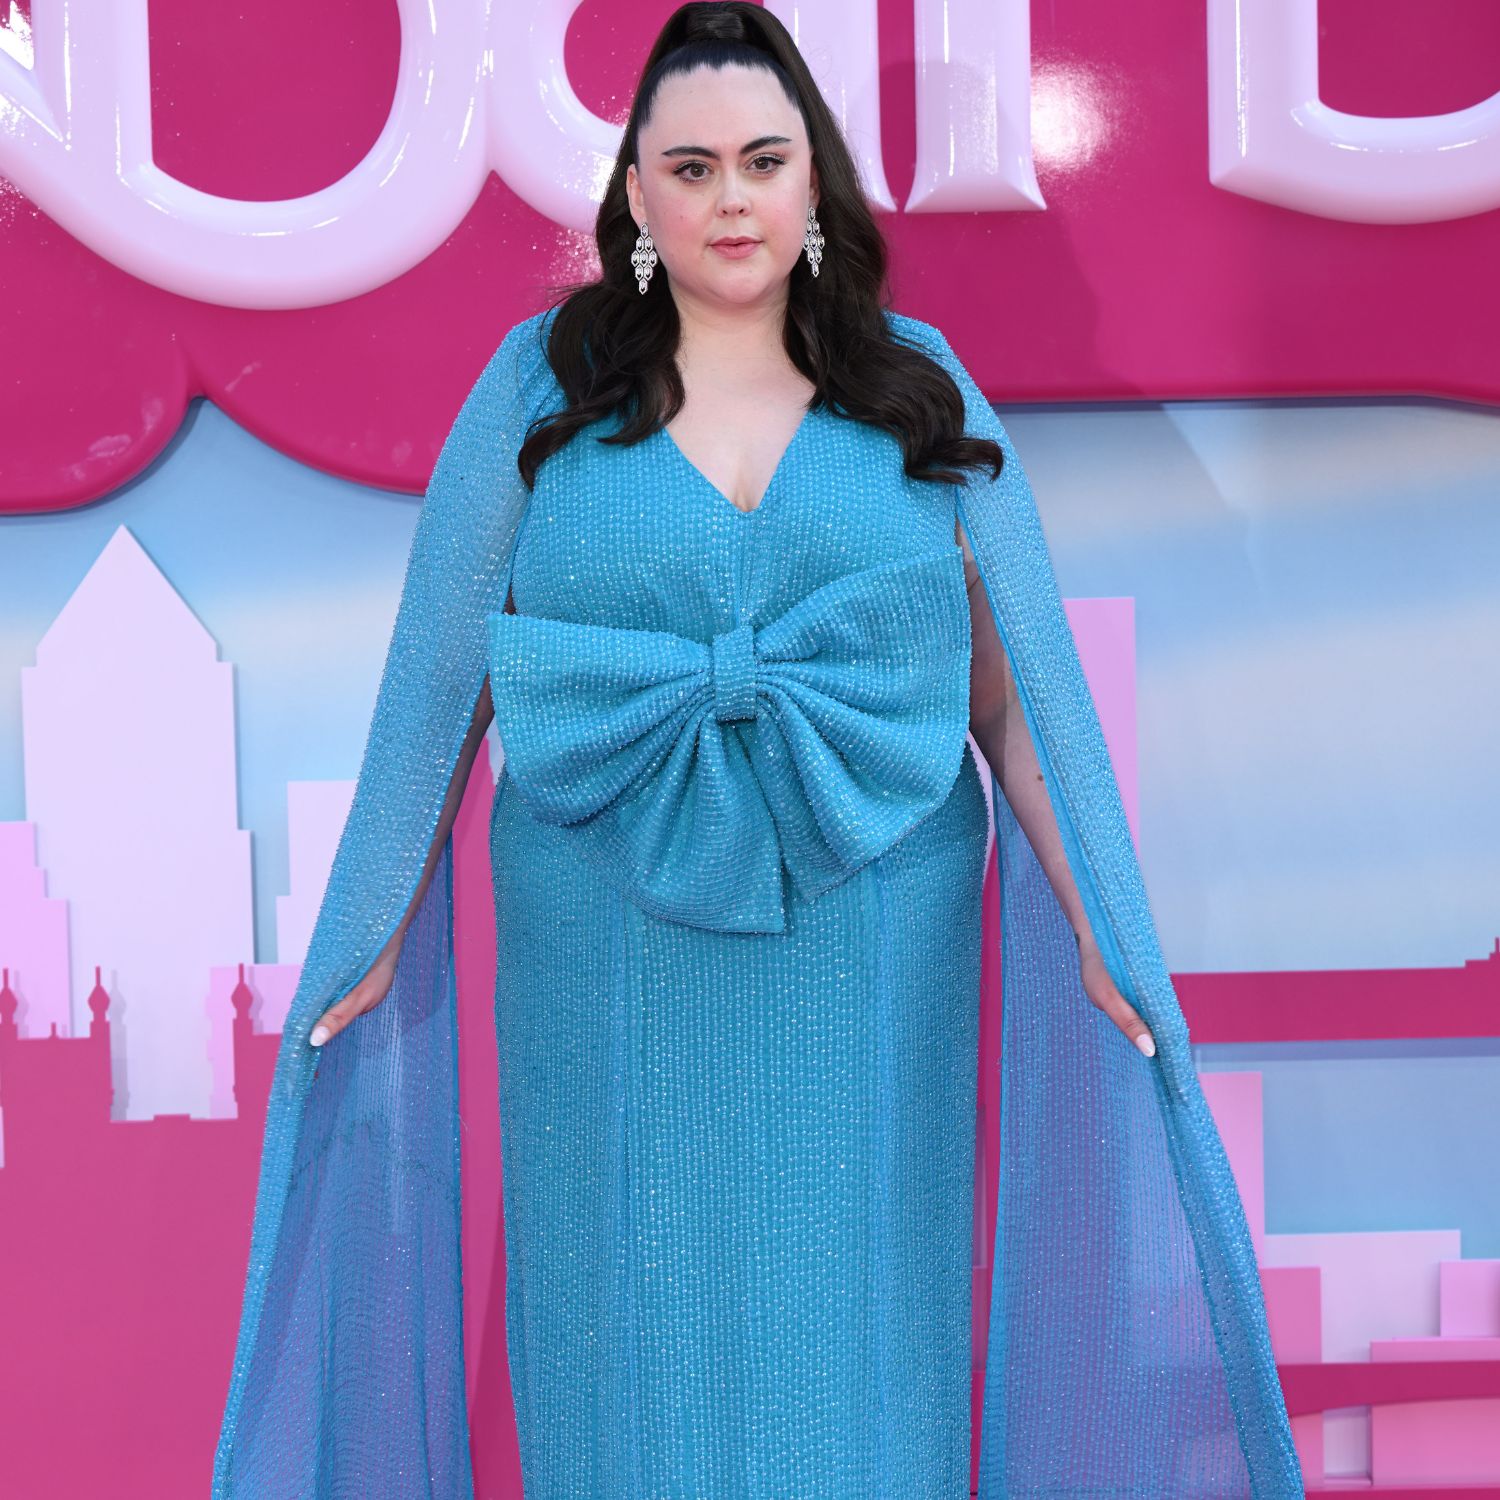  We spent the day with Sharon Rooney—here she tells us what it's like to be a real-life Barbie 